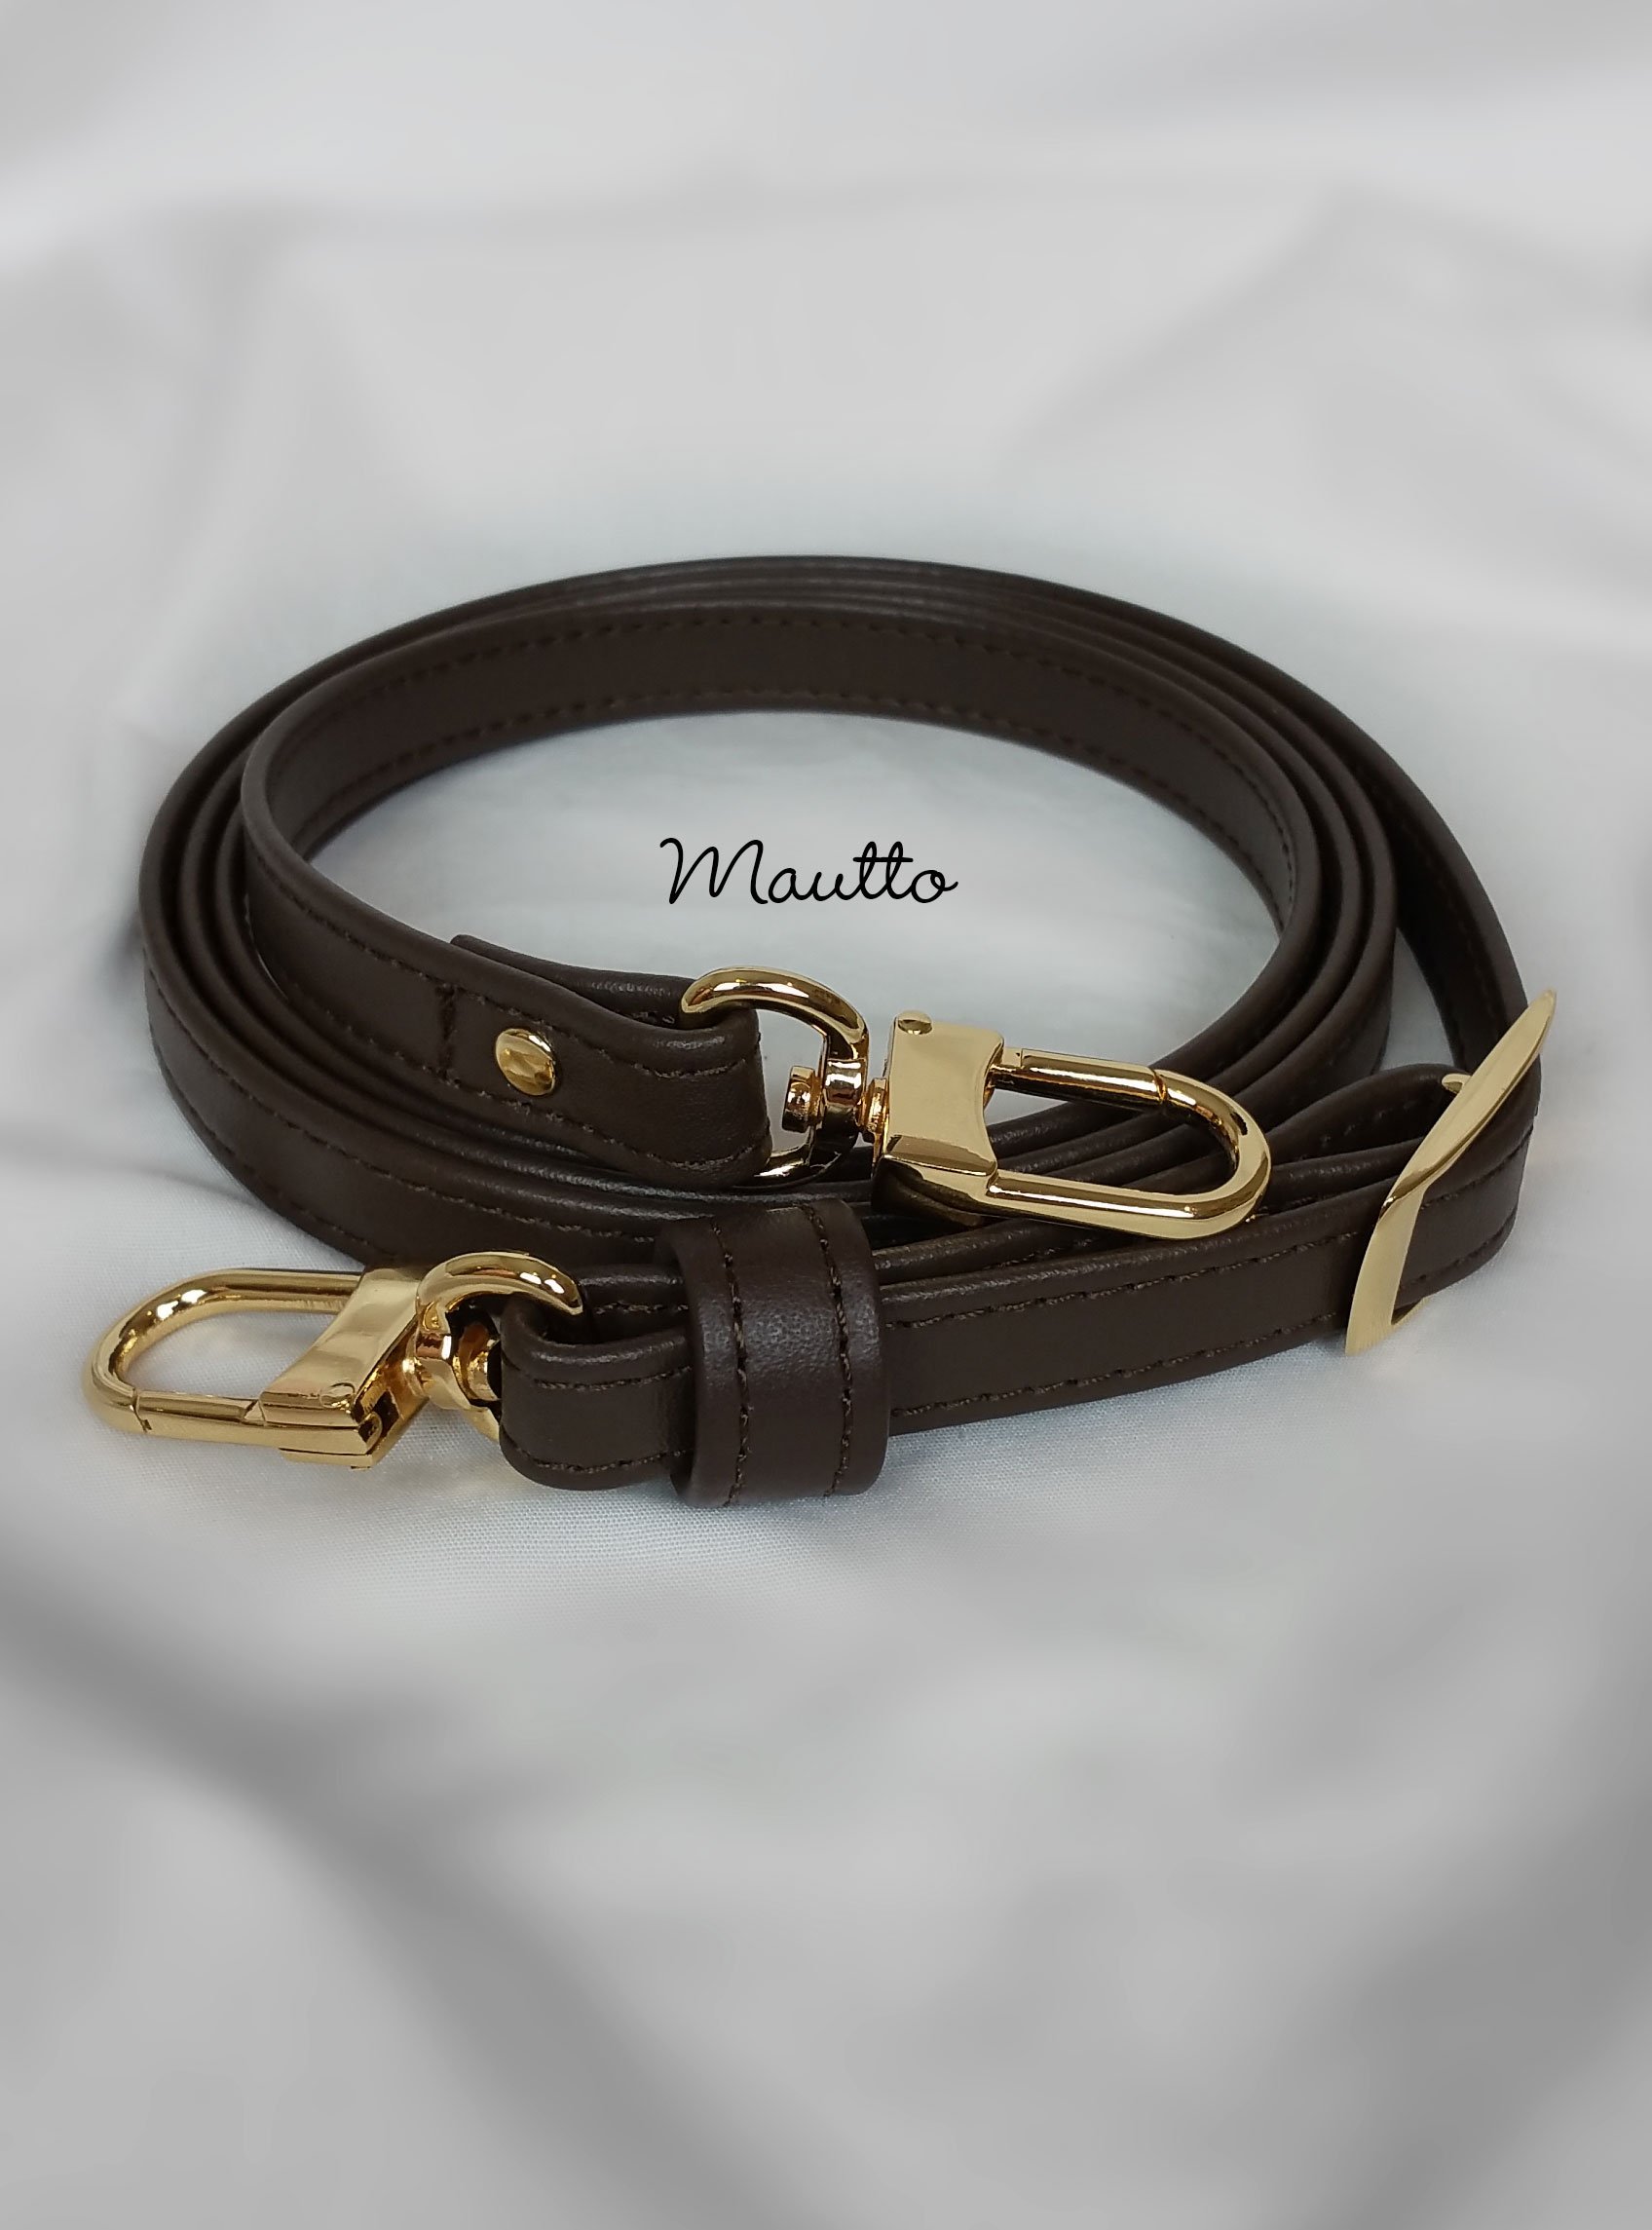 Dark Brown Leather Strap for Louis Vuitton Pochette/Eva/etc - .5 Wide -  Fixed or Adjustable Lengths, Mautto Handbags